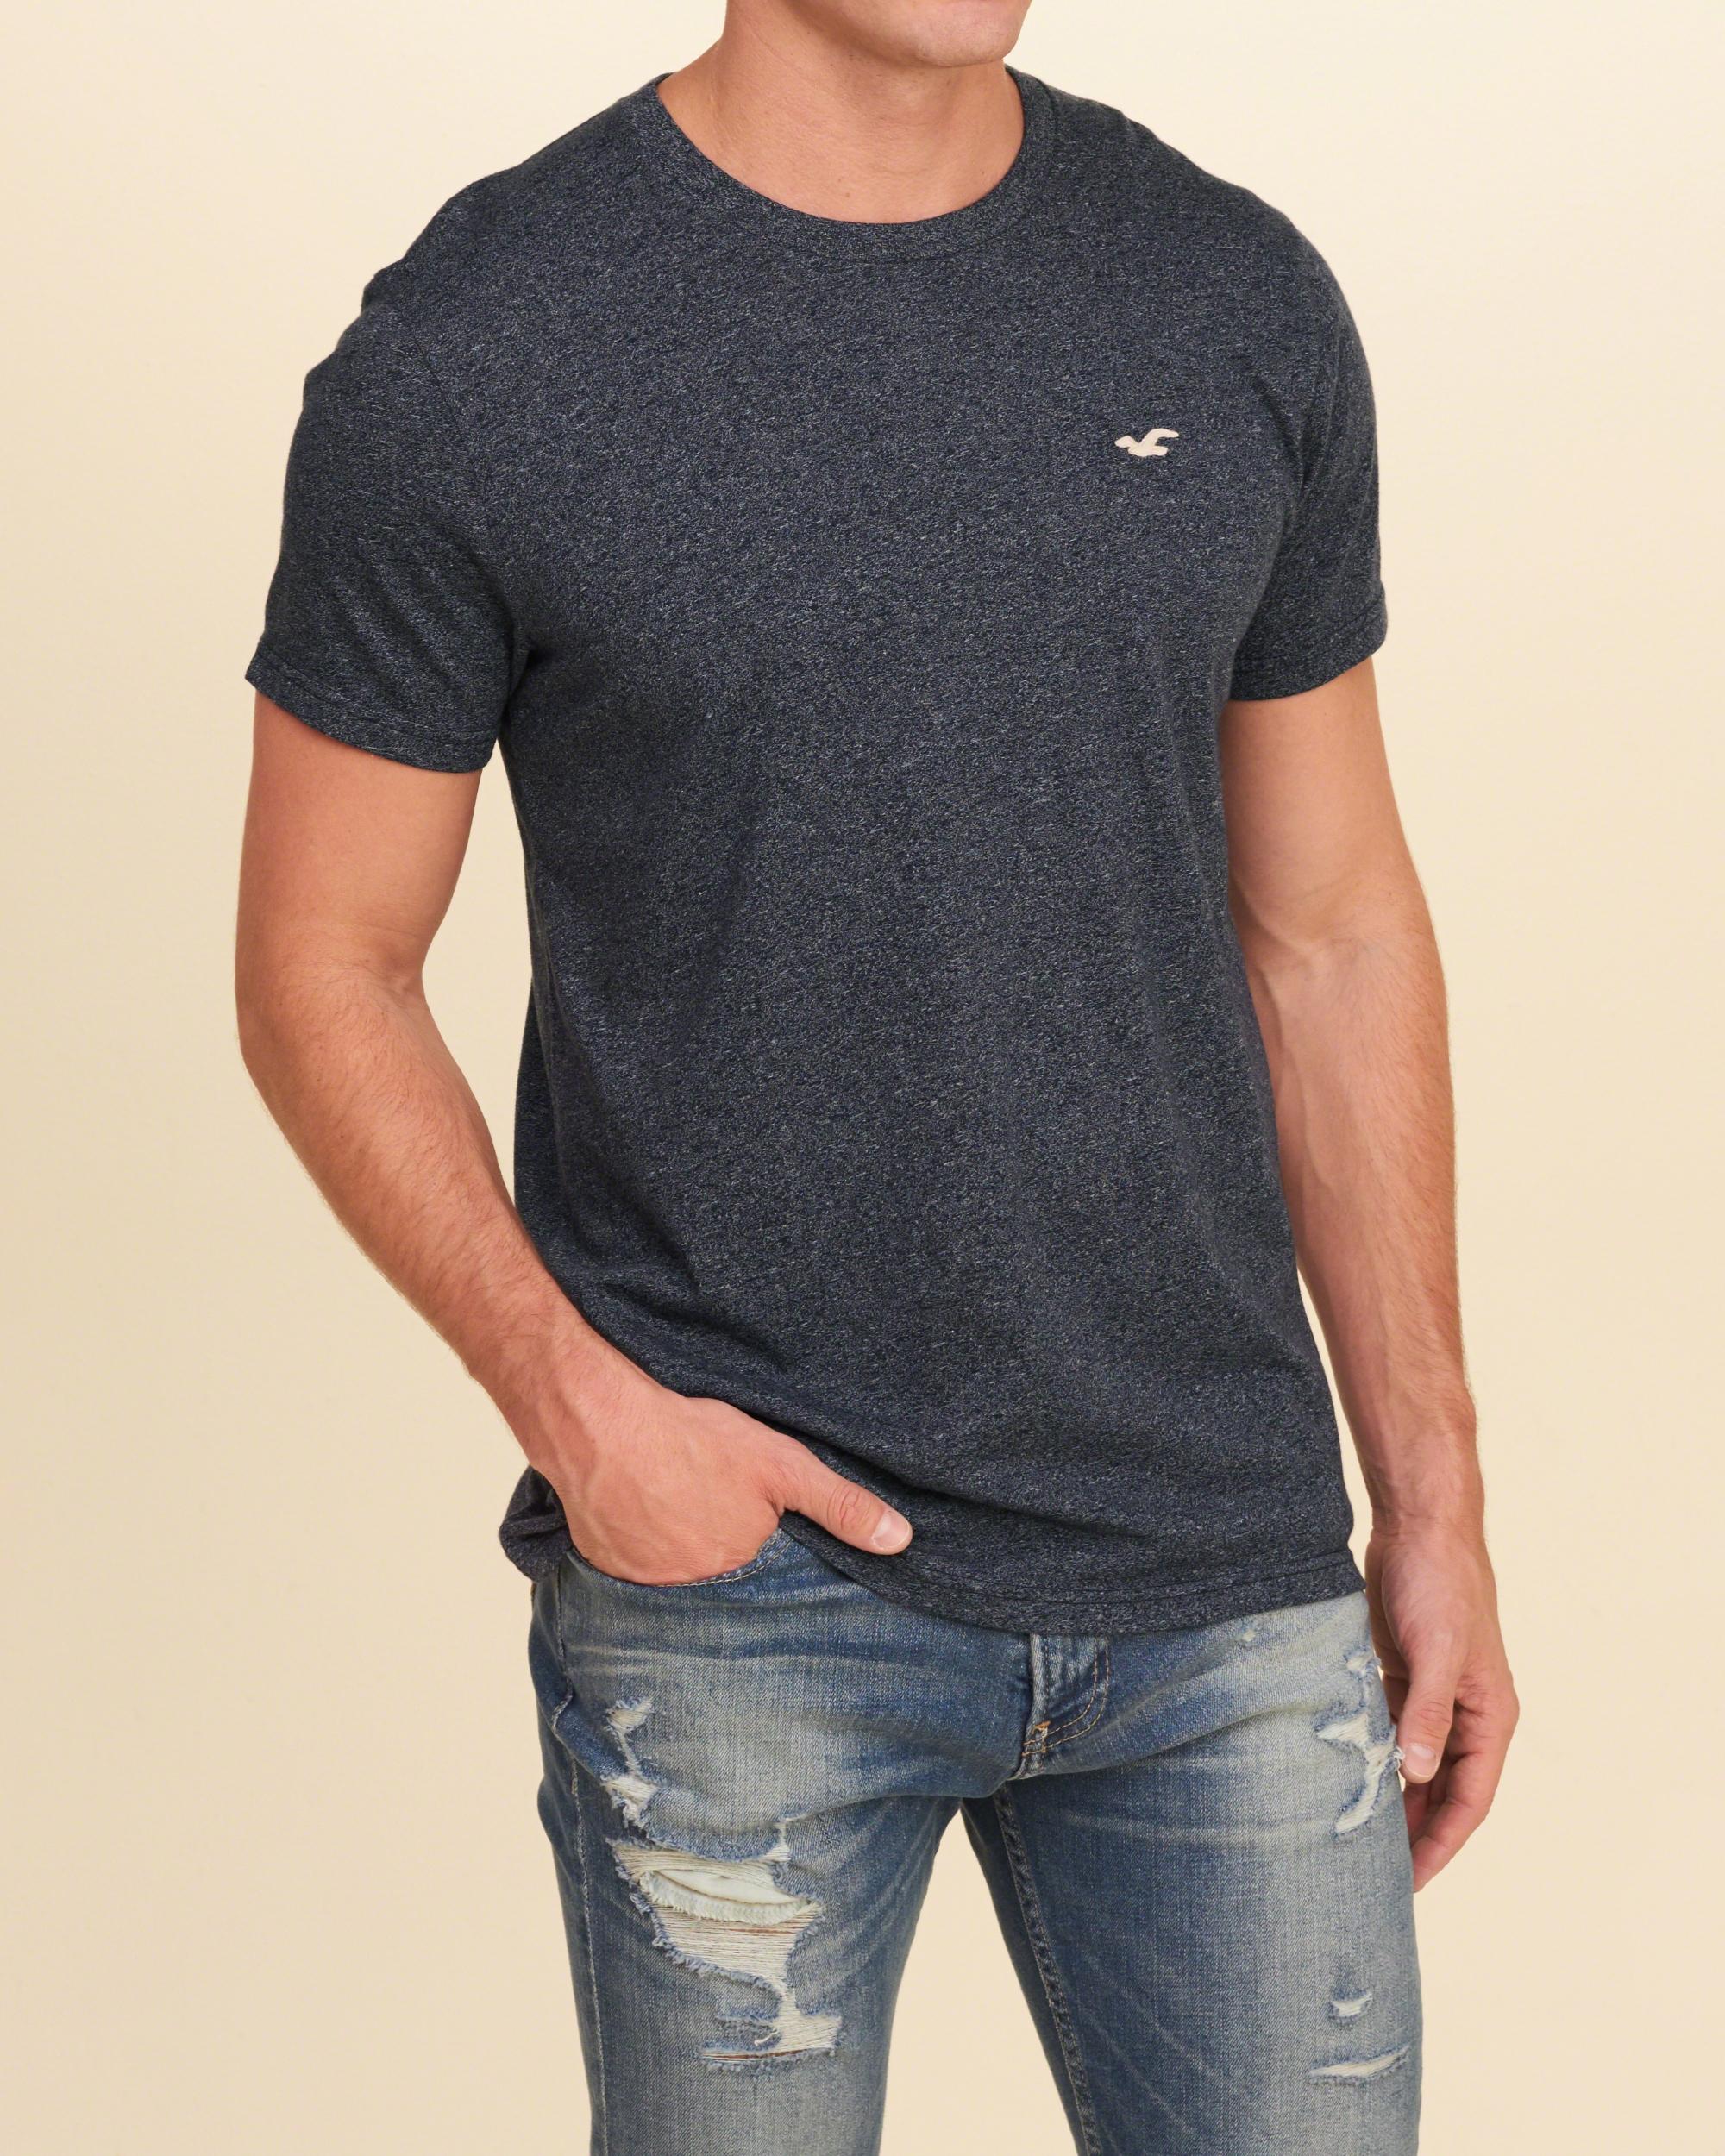 Lyst - Hollister Must-have Crew T-shirt in Blue for Men